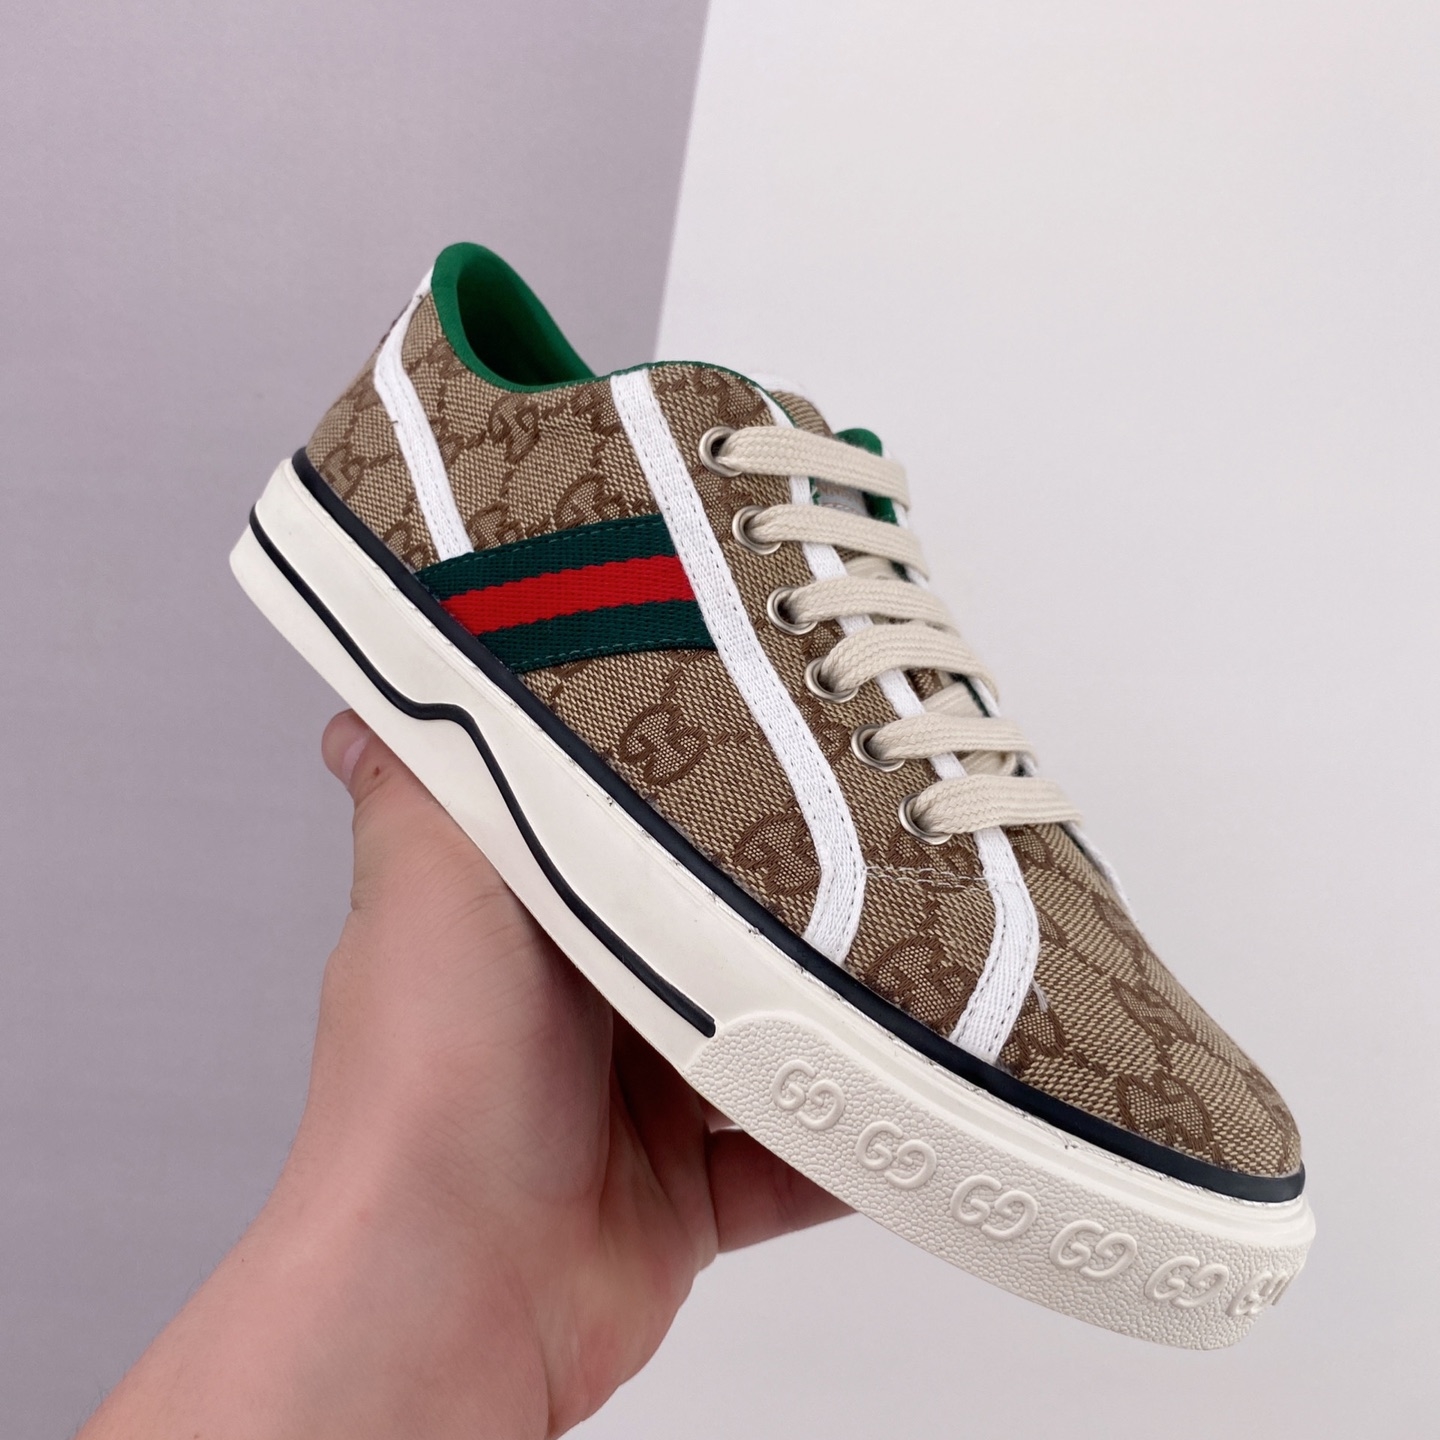 Gucci Tennis 1977 Canvas Sneakers: Classic Style & Luxury Comfort